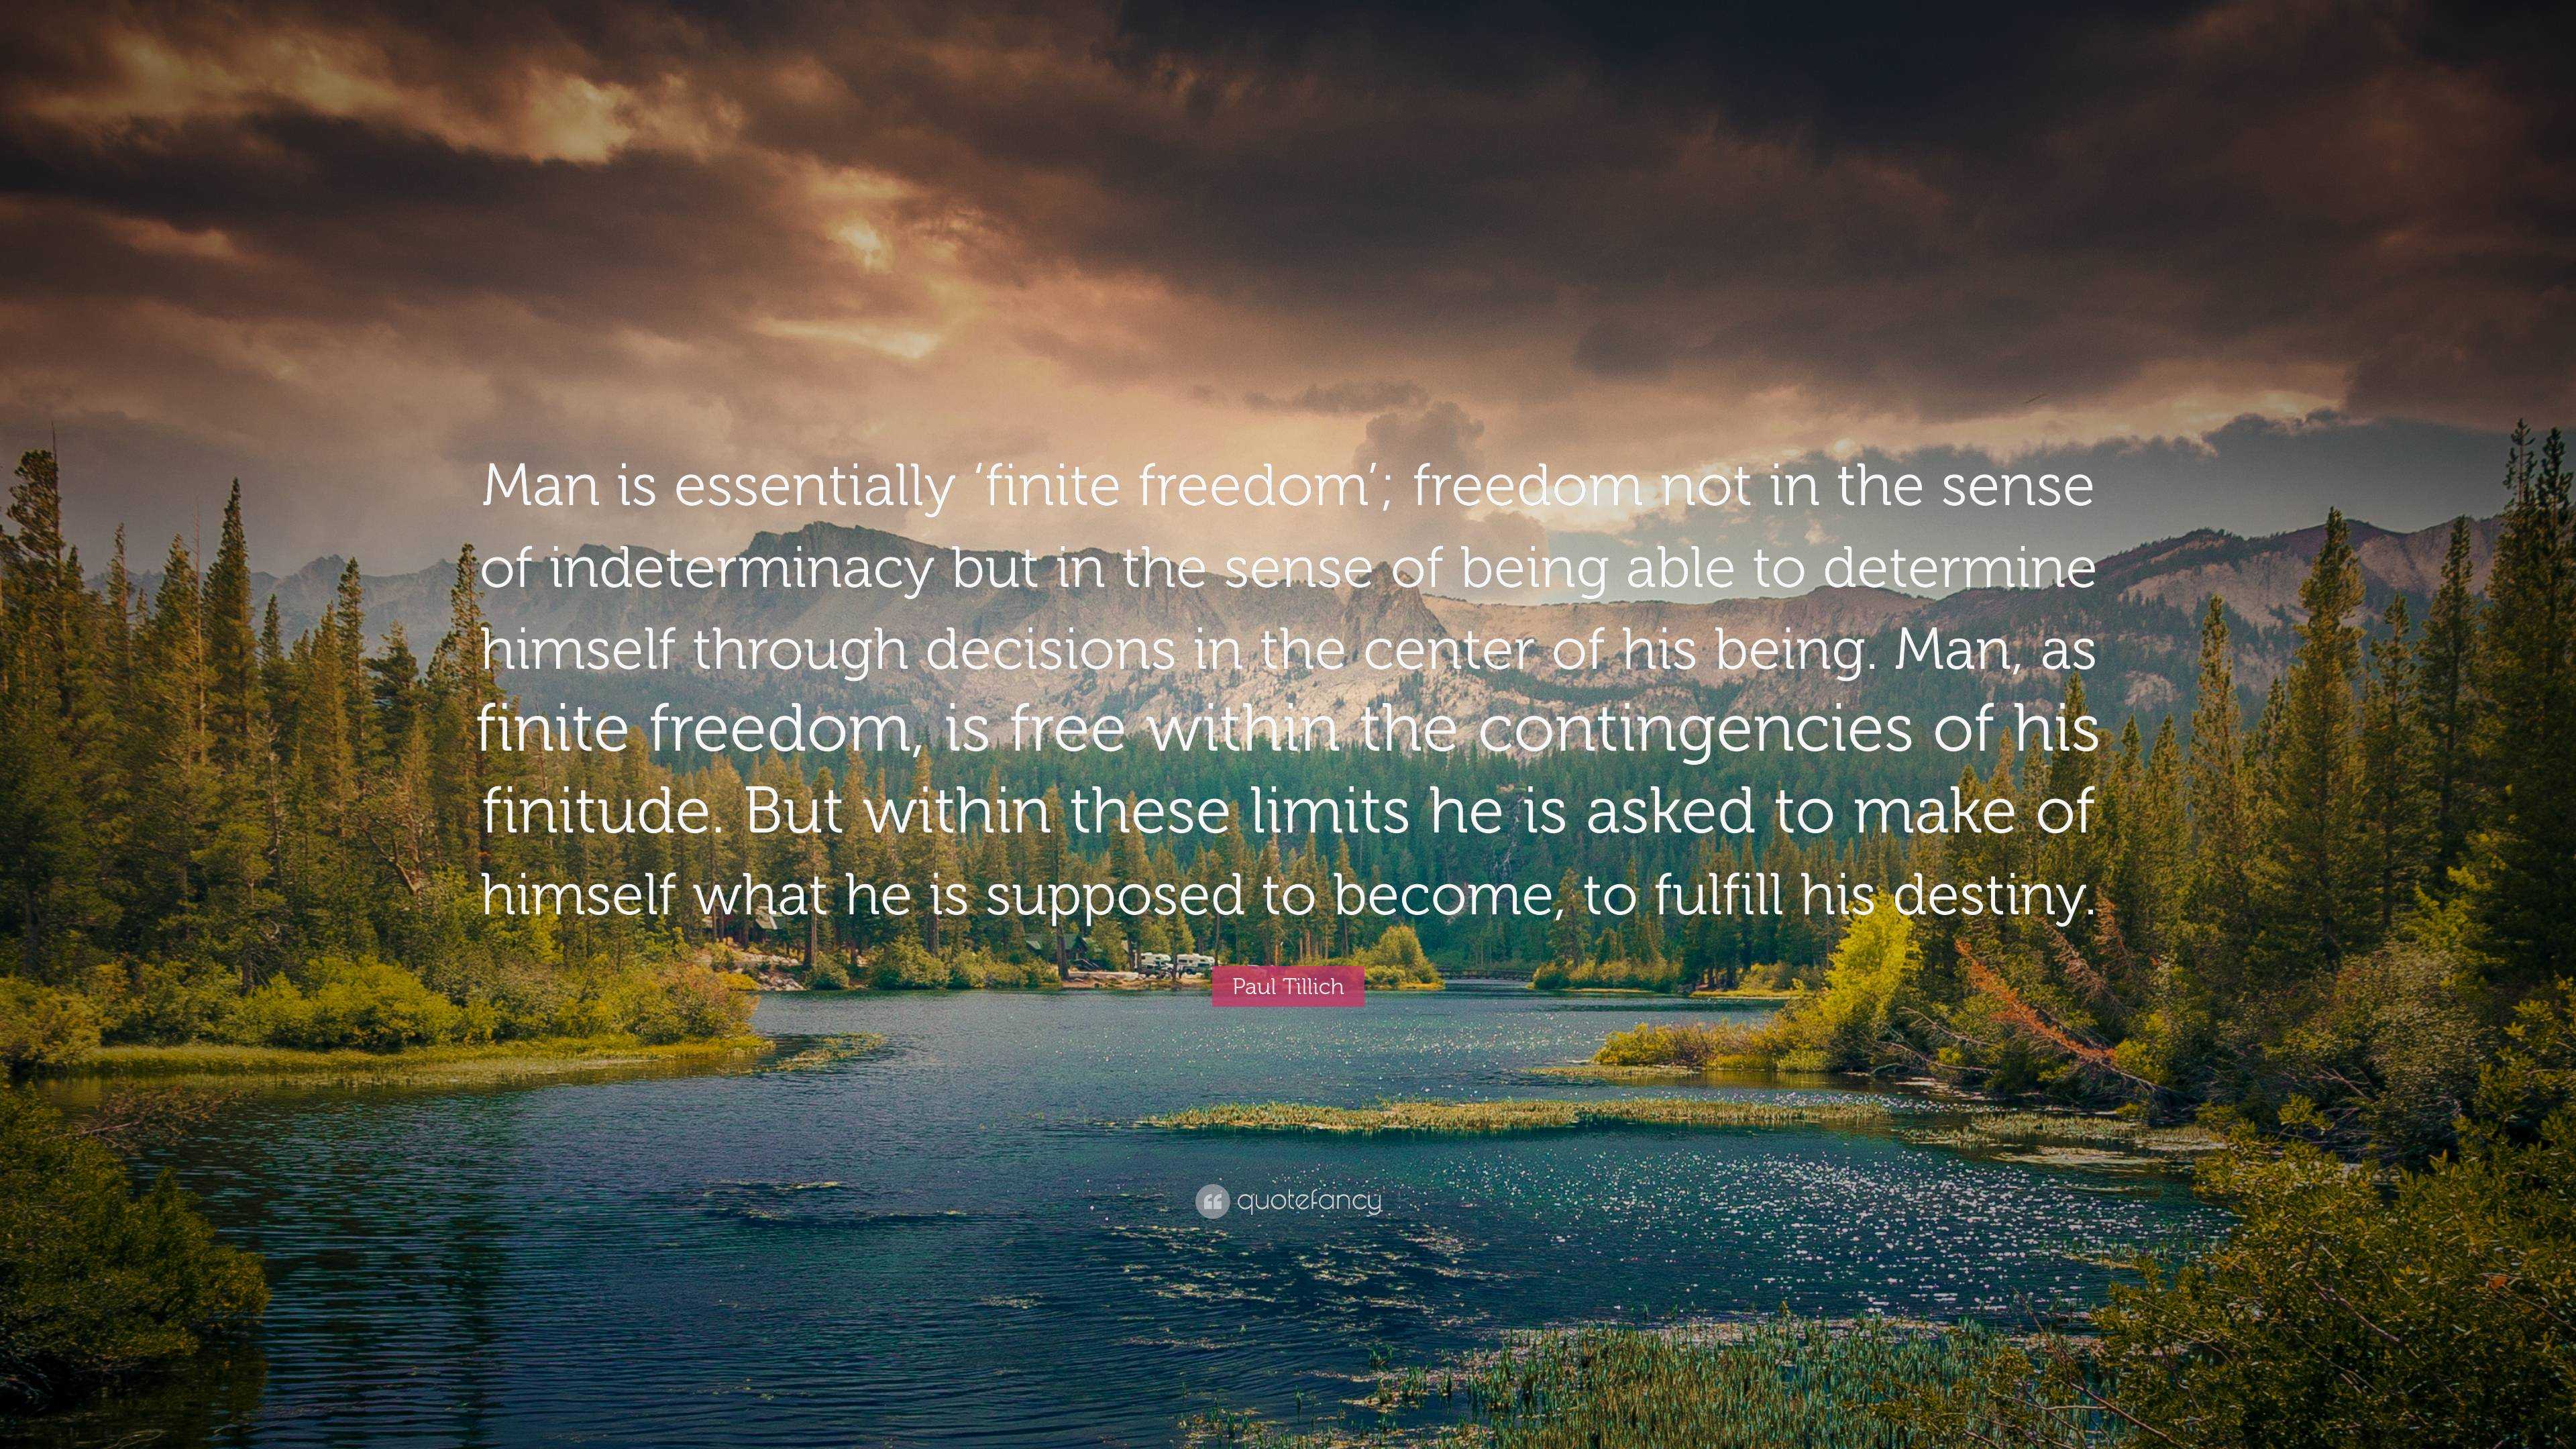 Freedom Philosophy: Over 2,899 Royalty-Free Licensable Stock